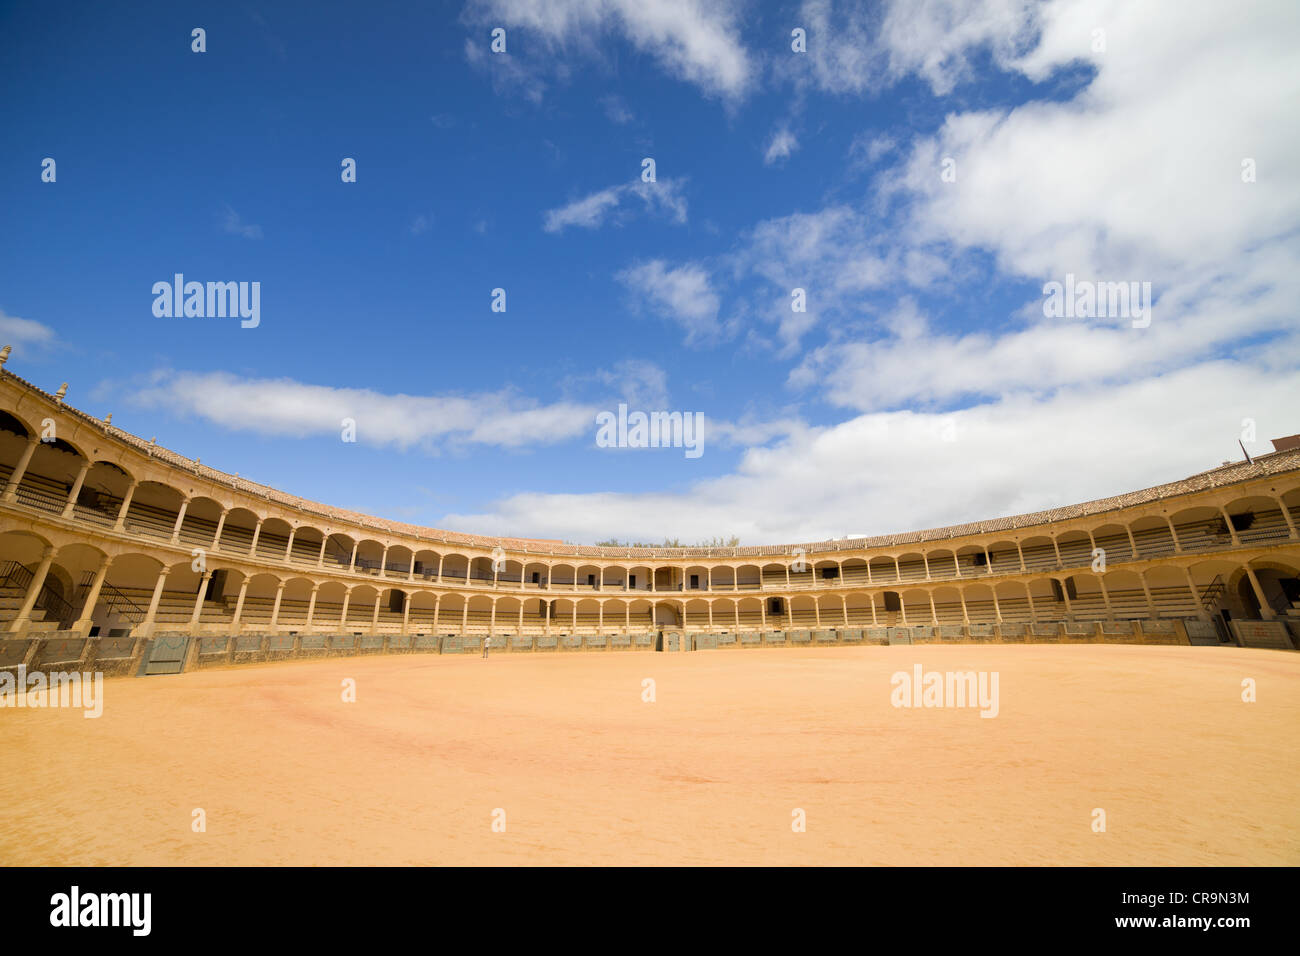 Bullring in Ronda, opened in 1785, one of the oldest and most famous bullfighting arena in Spain. Stock Photo